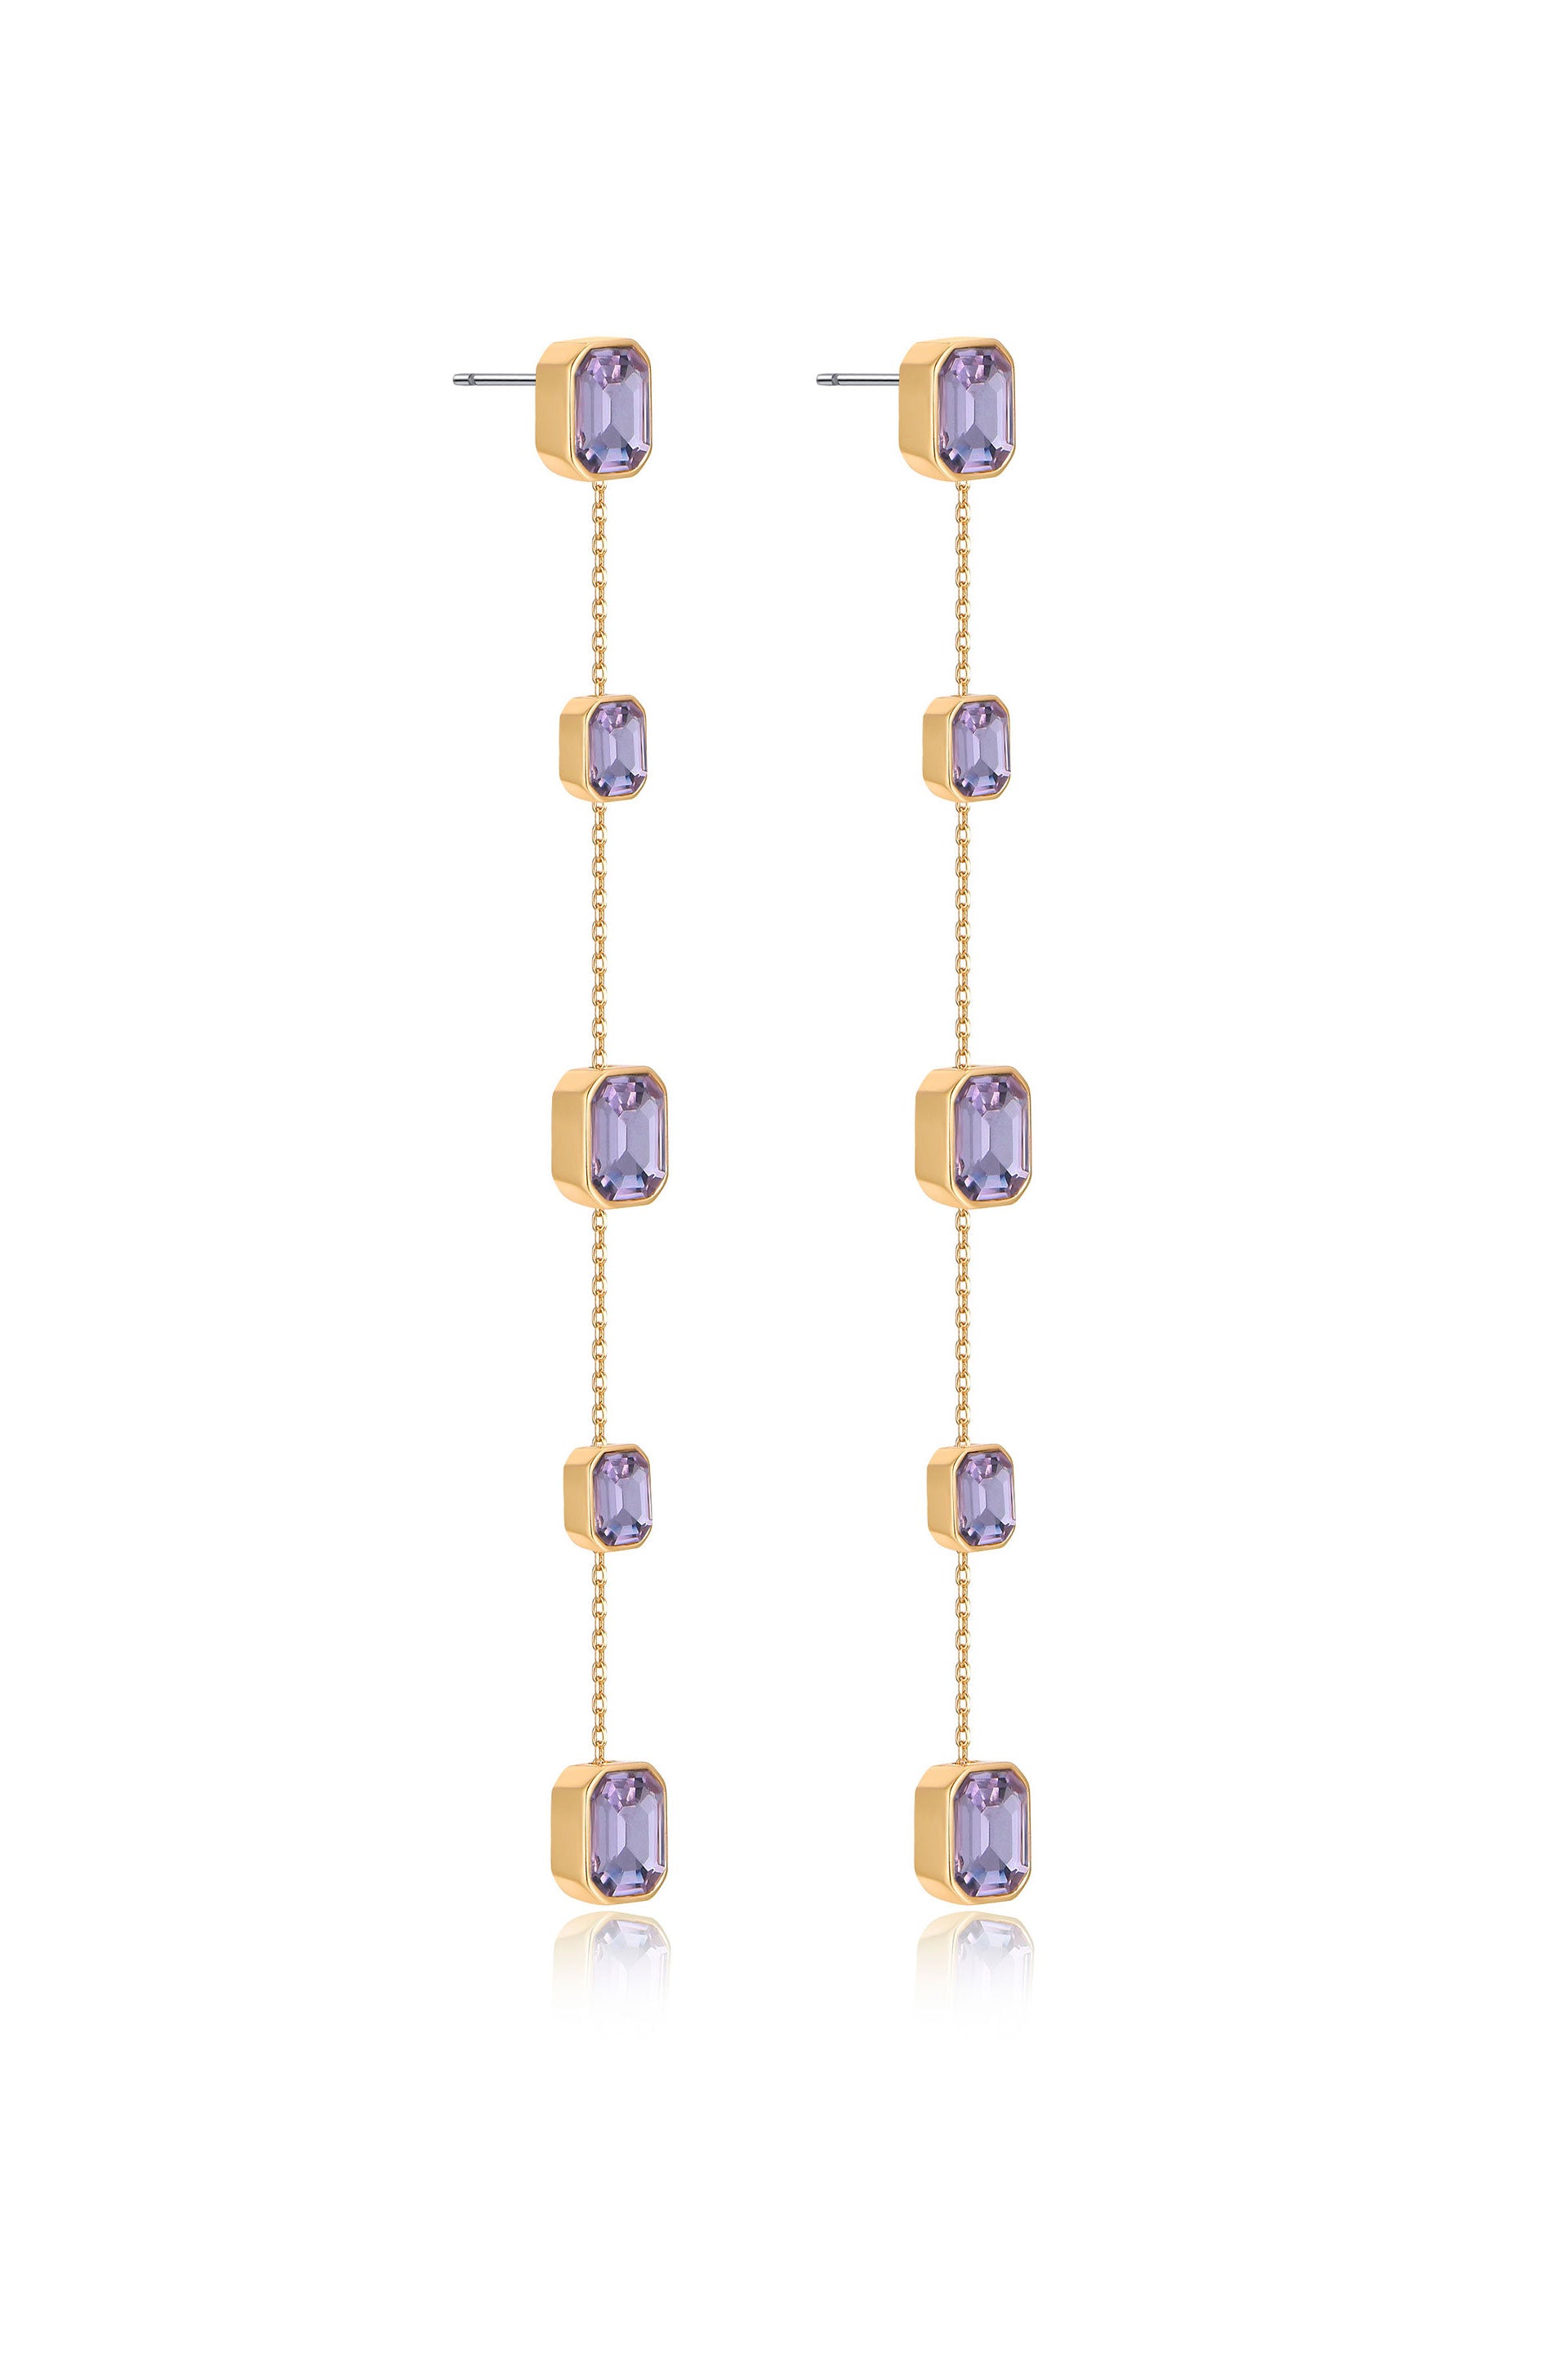 Iconic Crystal Dangle Earrings in light amethyst crystals facing side